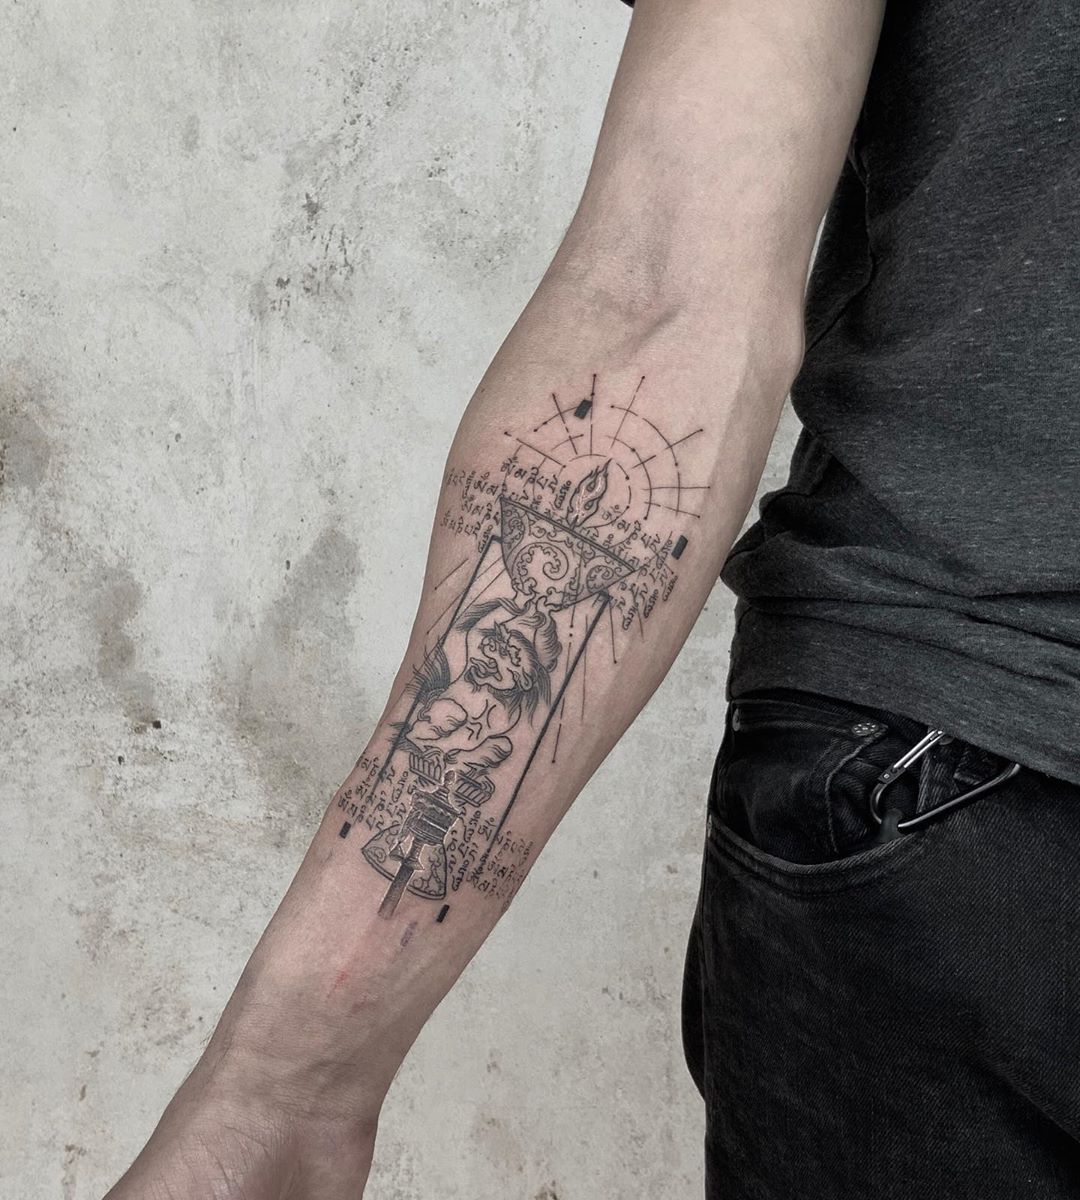  | Geometric tattoos: an abstract tattoo style with its meanings